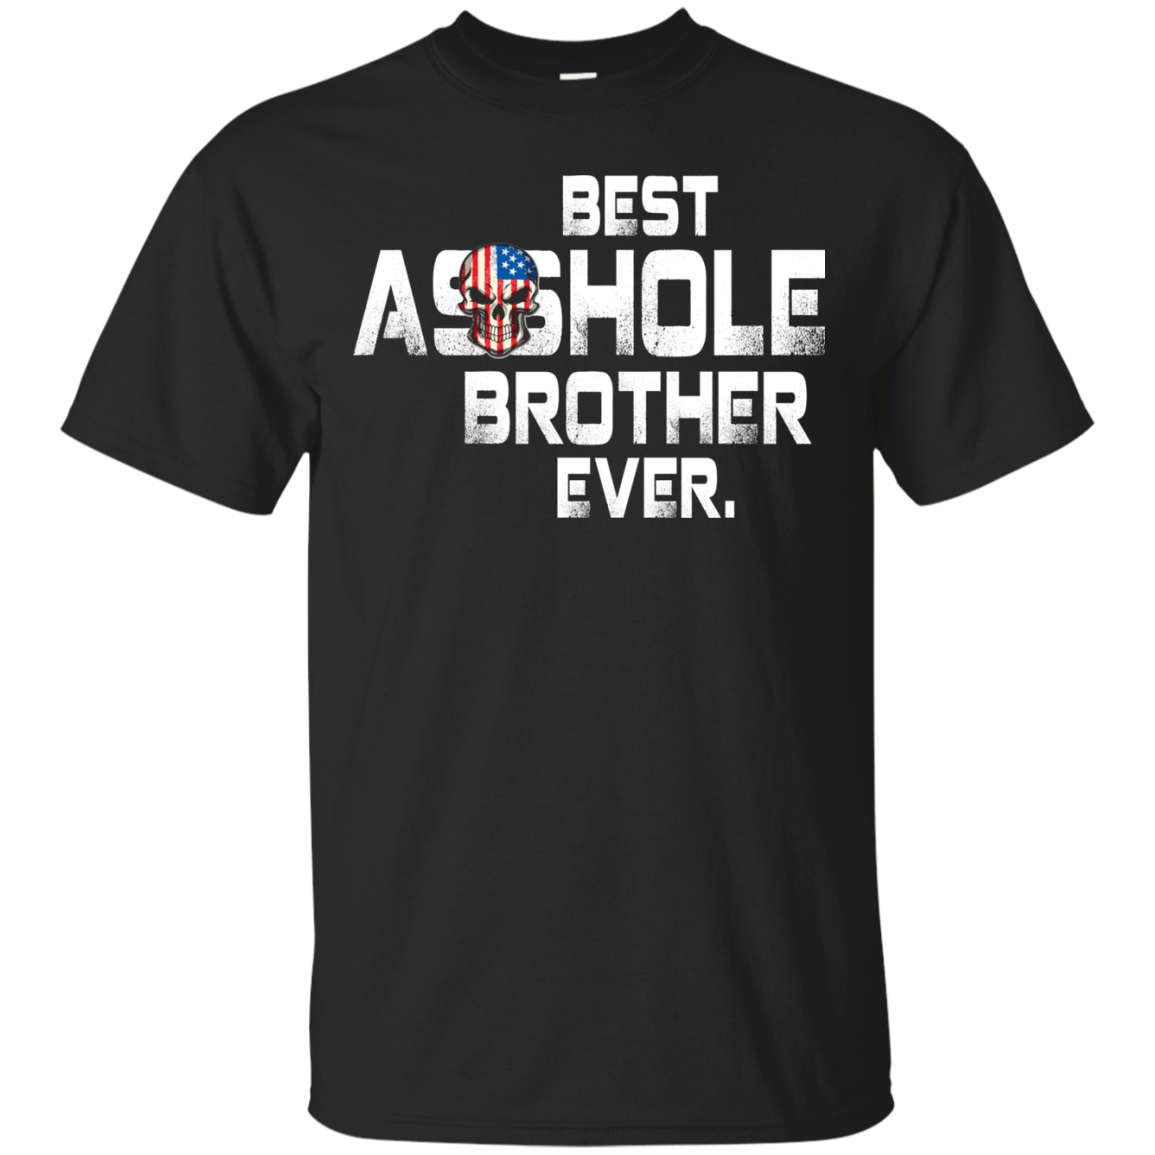 Best Asshole Brother Ever t-shirt, hoodie, tank